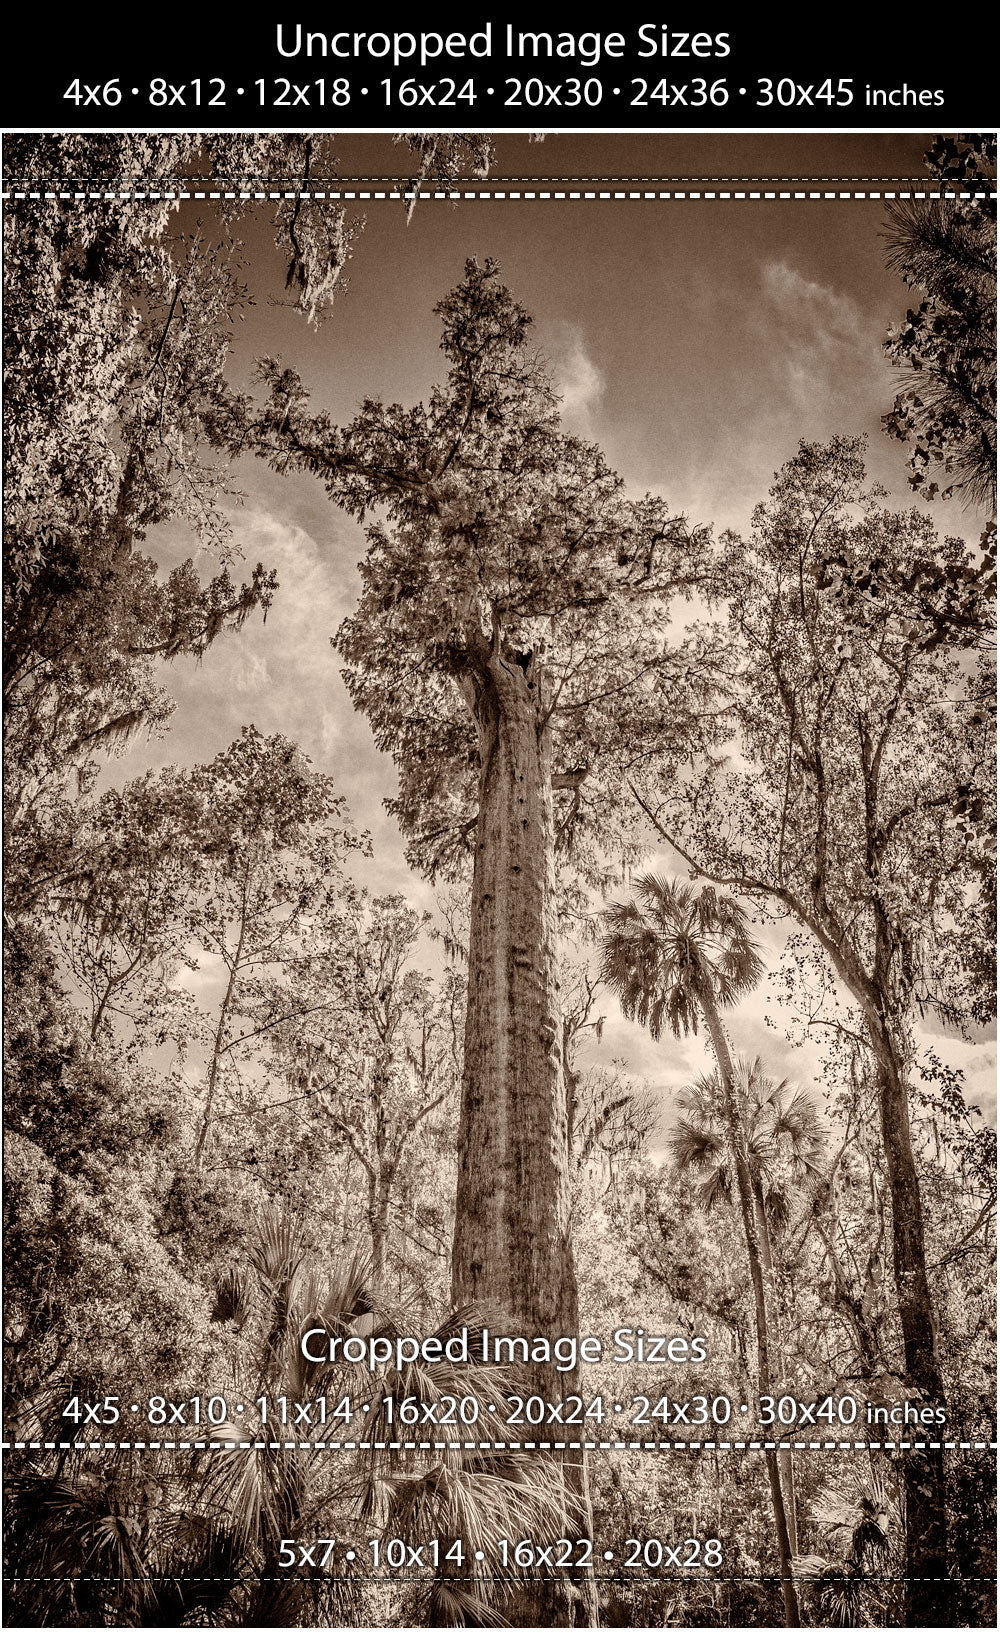 Once deep in Florida was an ancient Bald Cypress known as "The Senator"